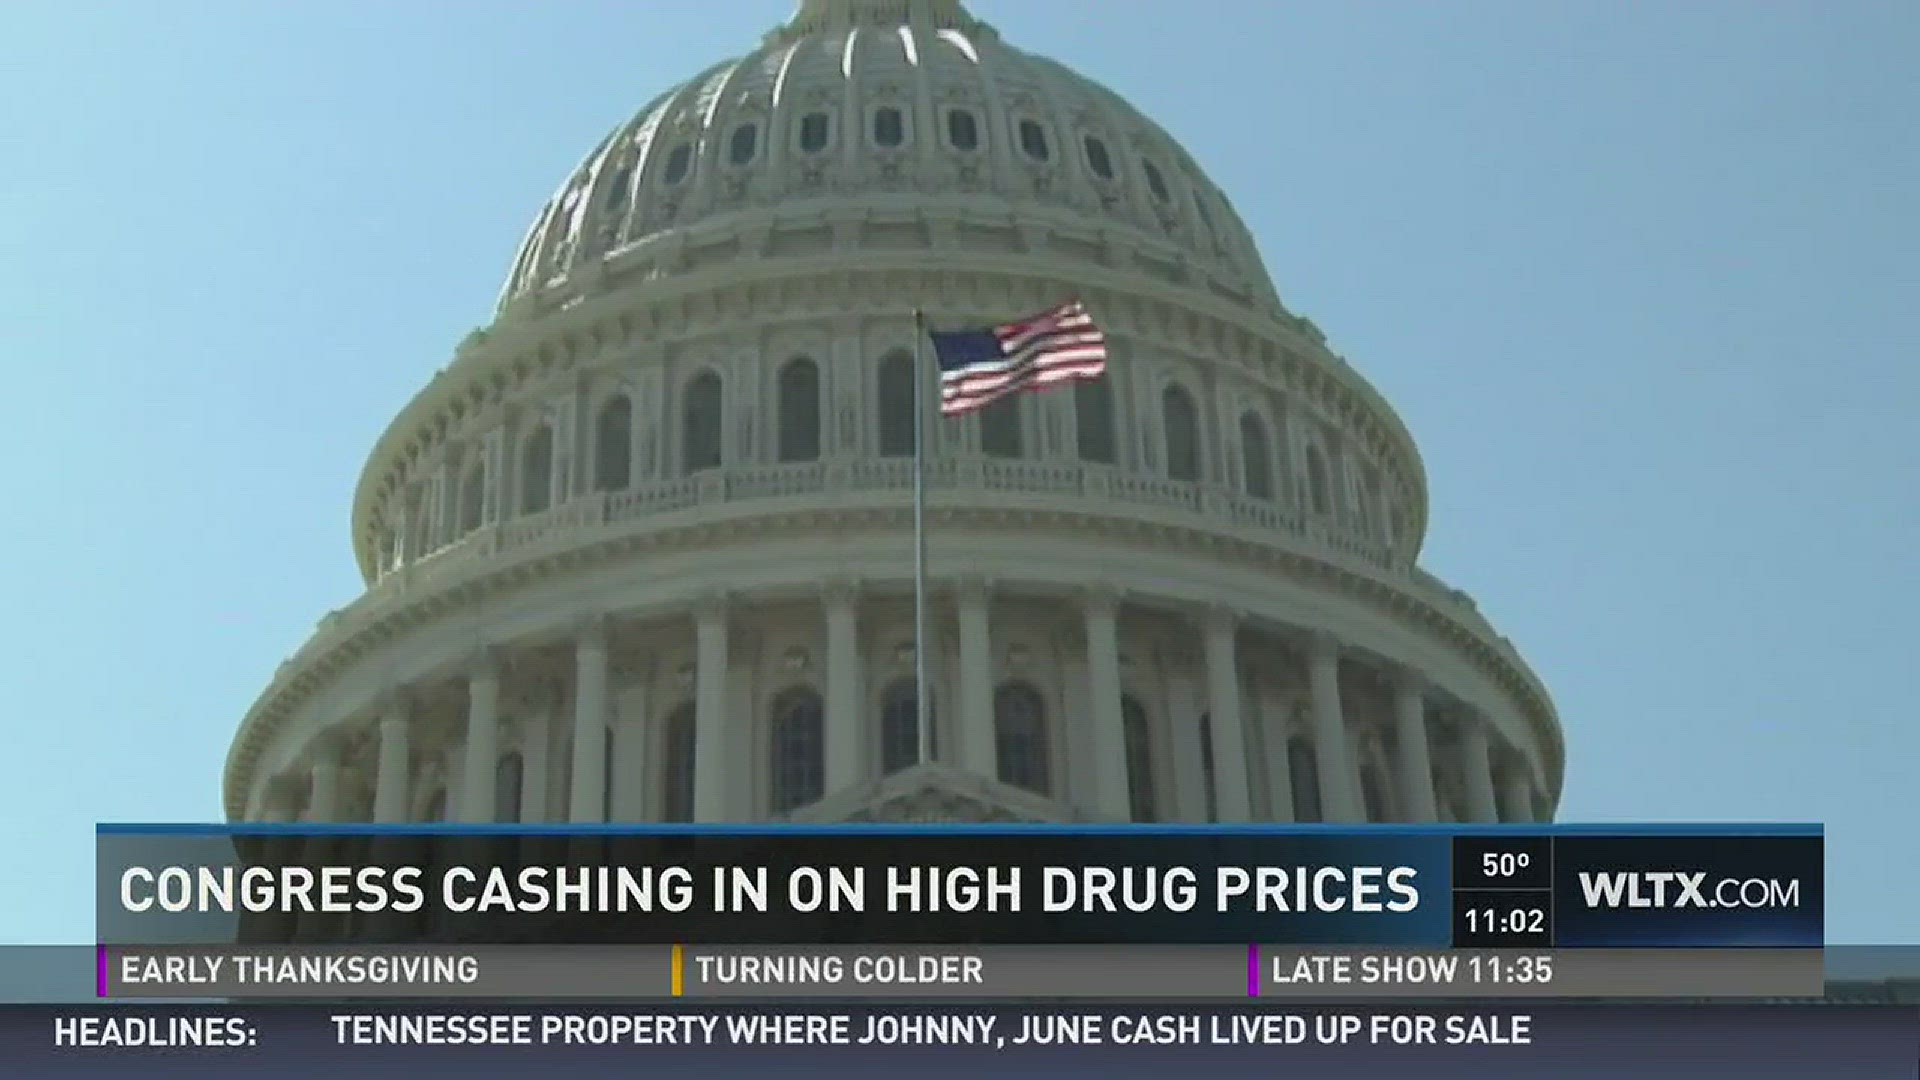 Congress cashing in on high drug prices